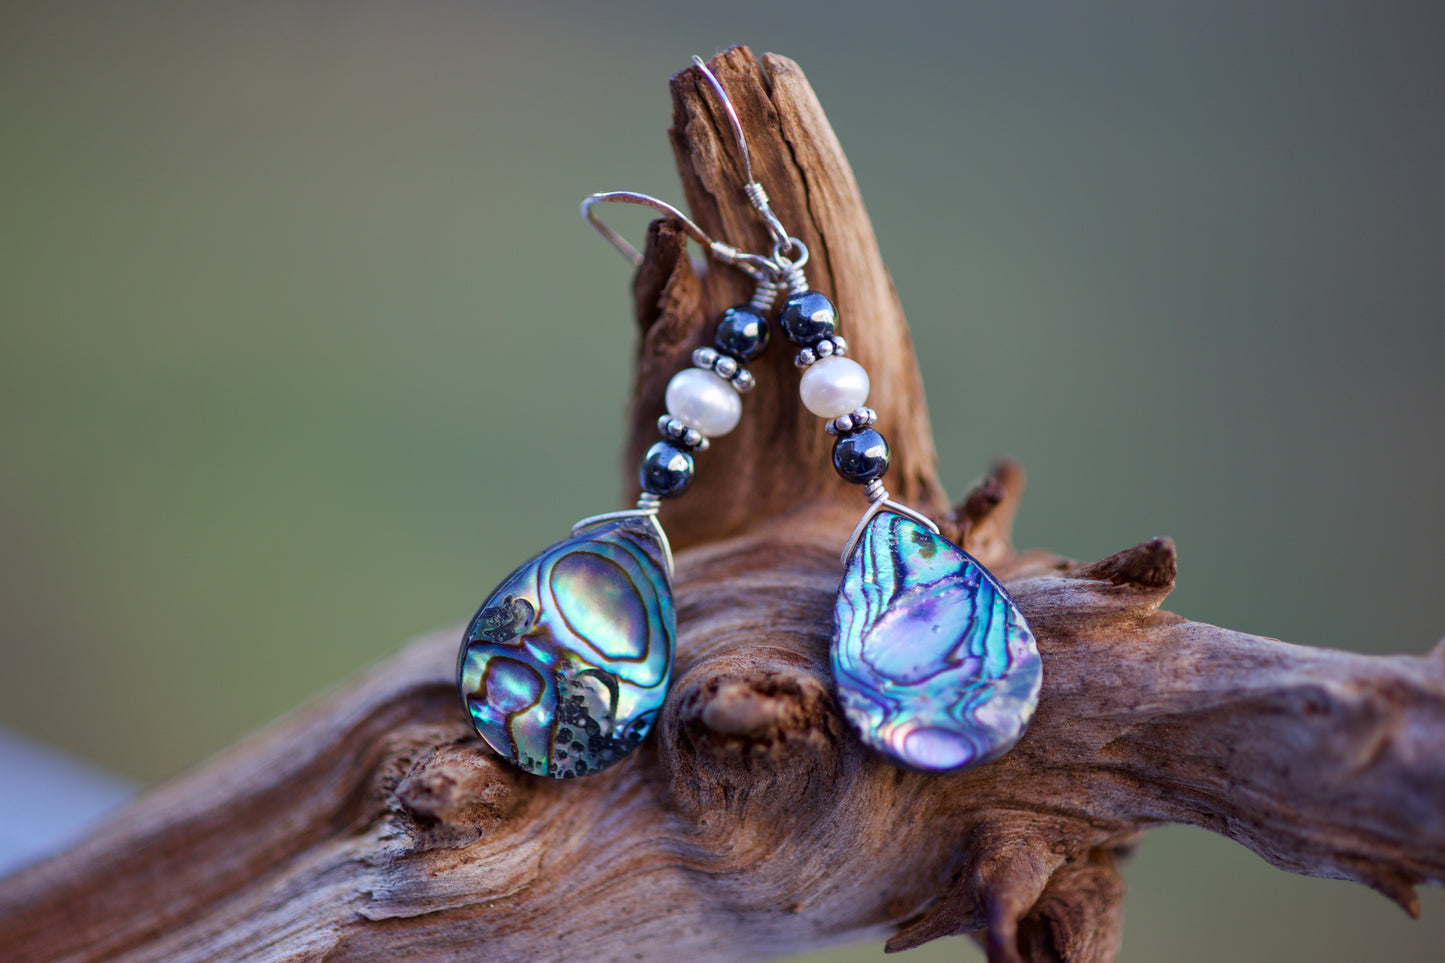 Hematite, Freshwater Pearl, Abalone, and Sterling Silver Earrings